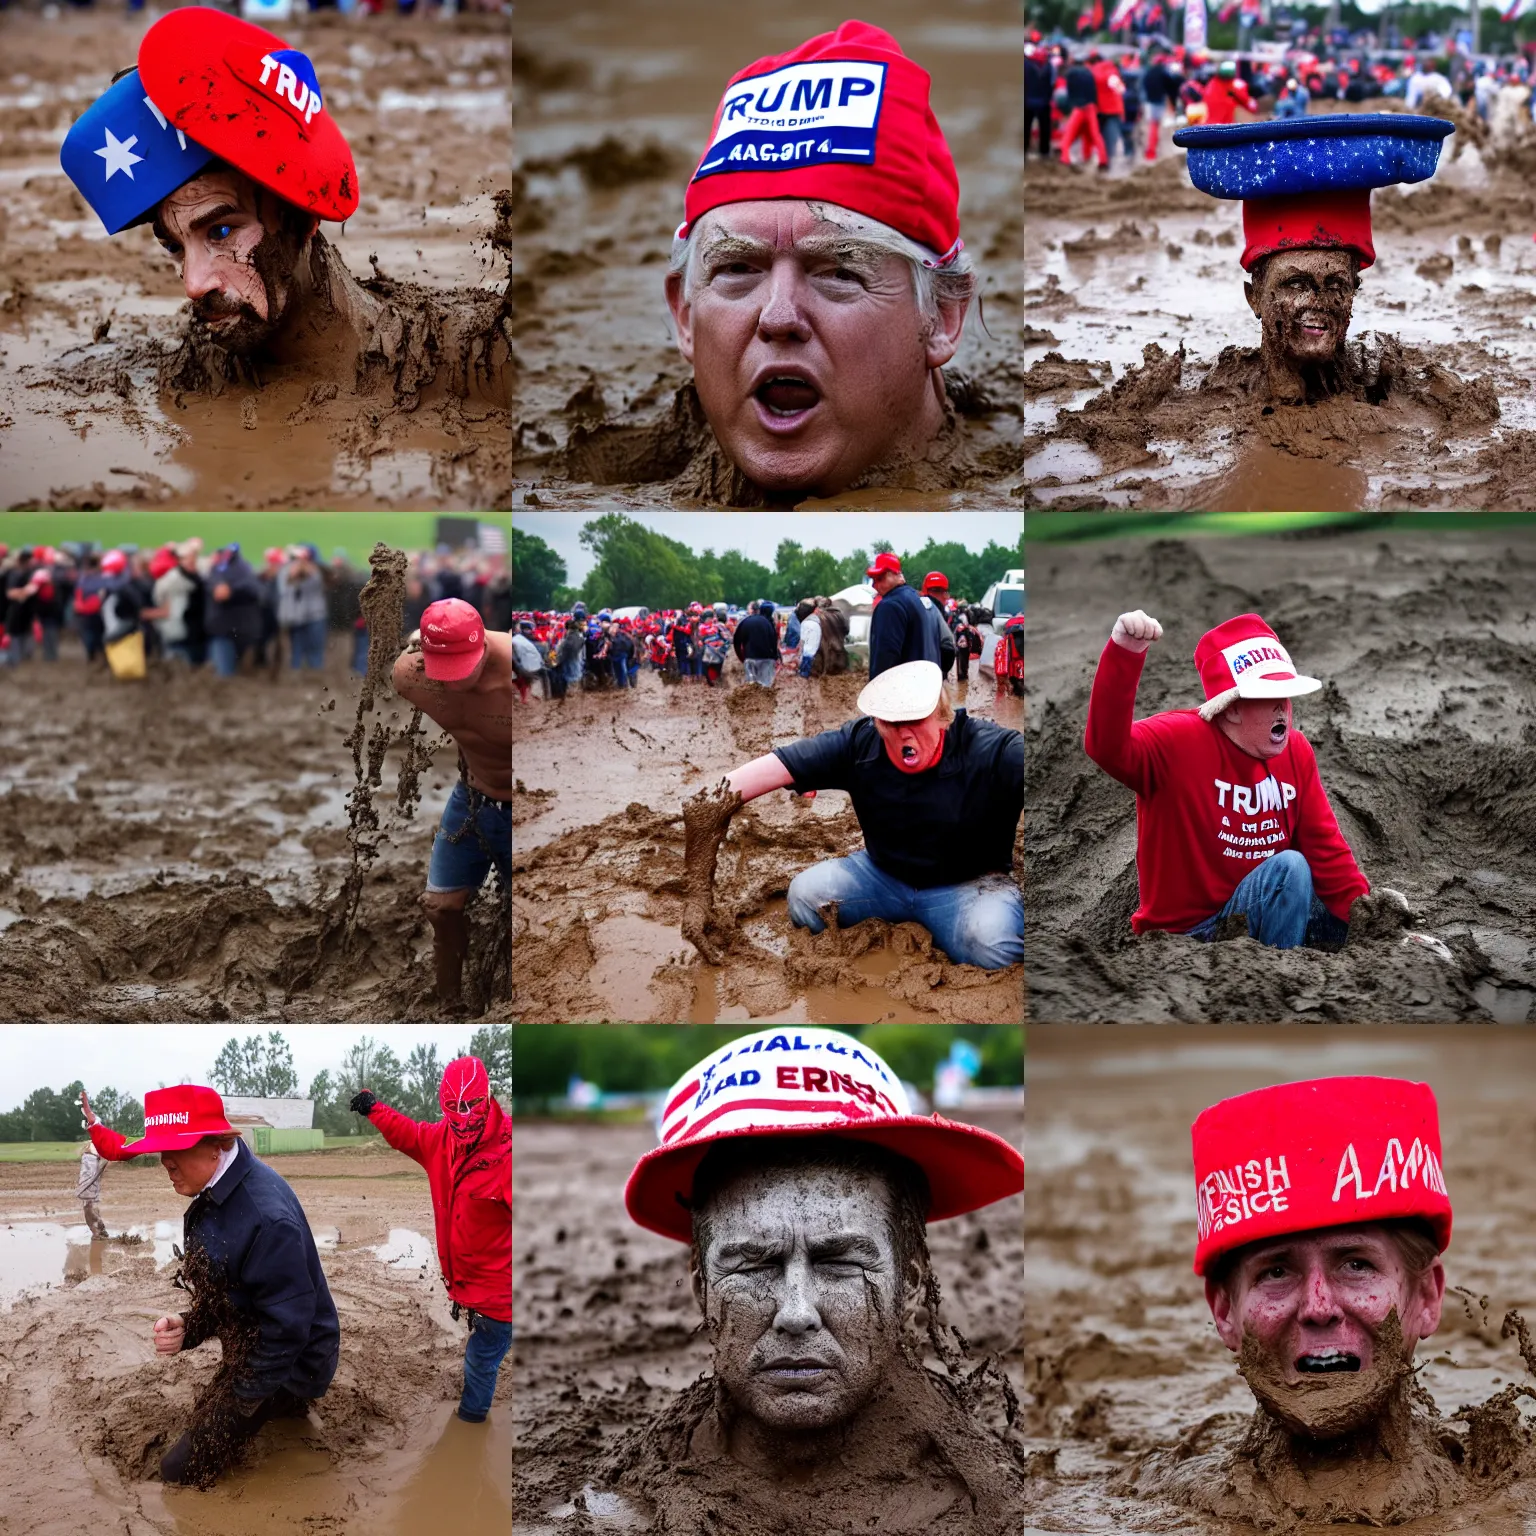 Prompt: flash photograph of a trump supporter with a very large head and a comically small hat, struggling in a mud pit